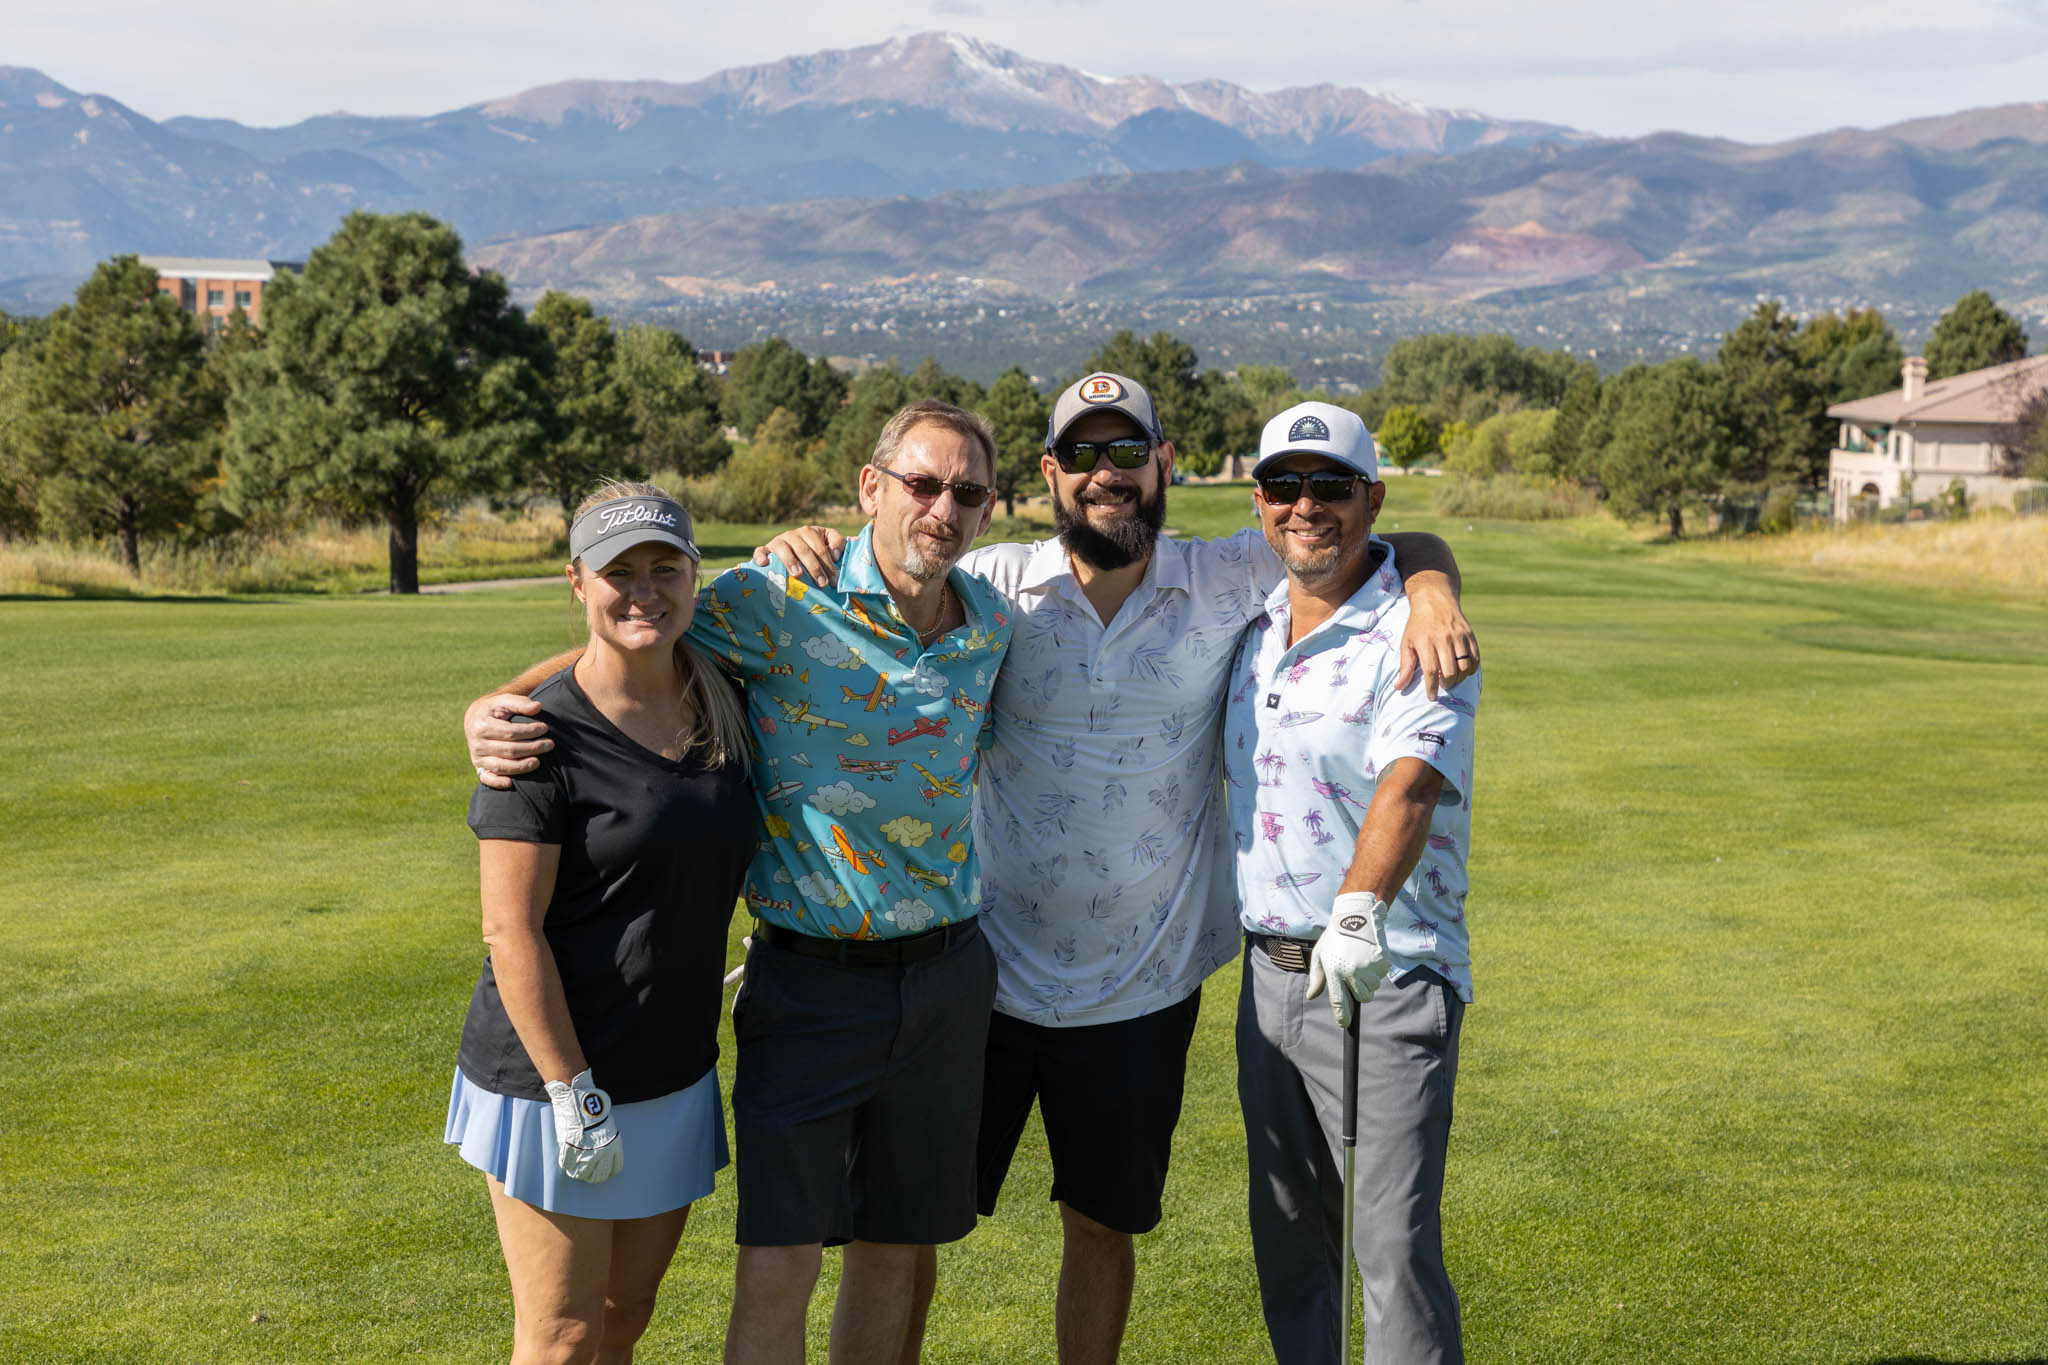 Four people posing for a photo on a golf course.